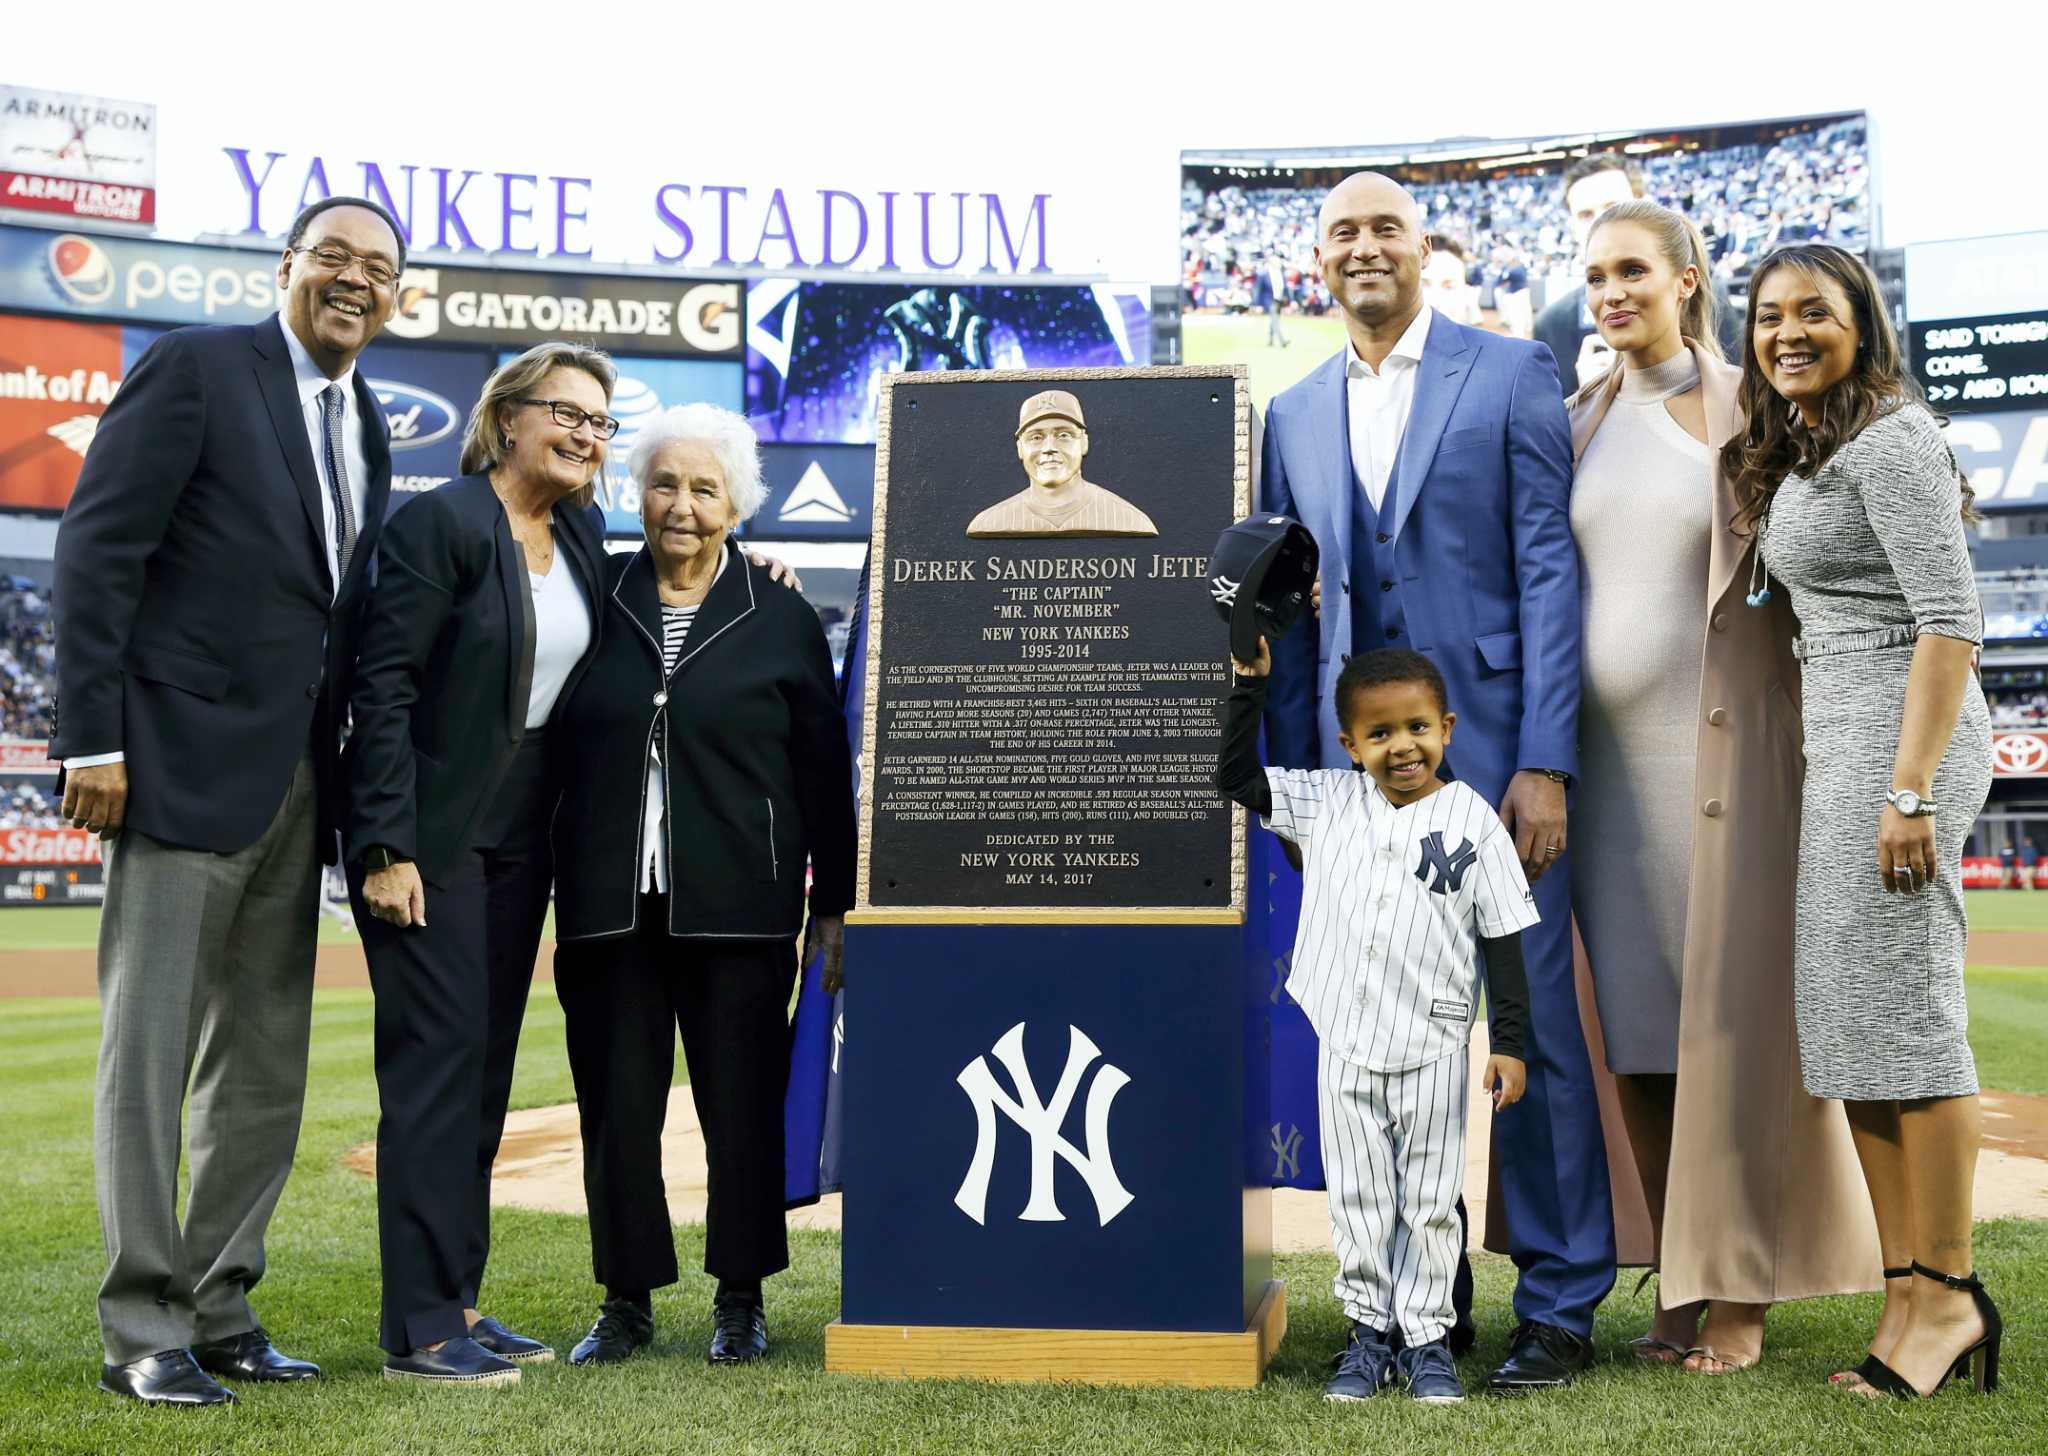 Who were the first and last Yankees players to wear the retired